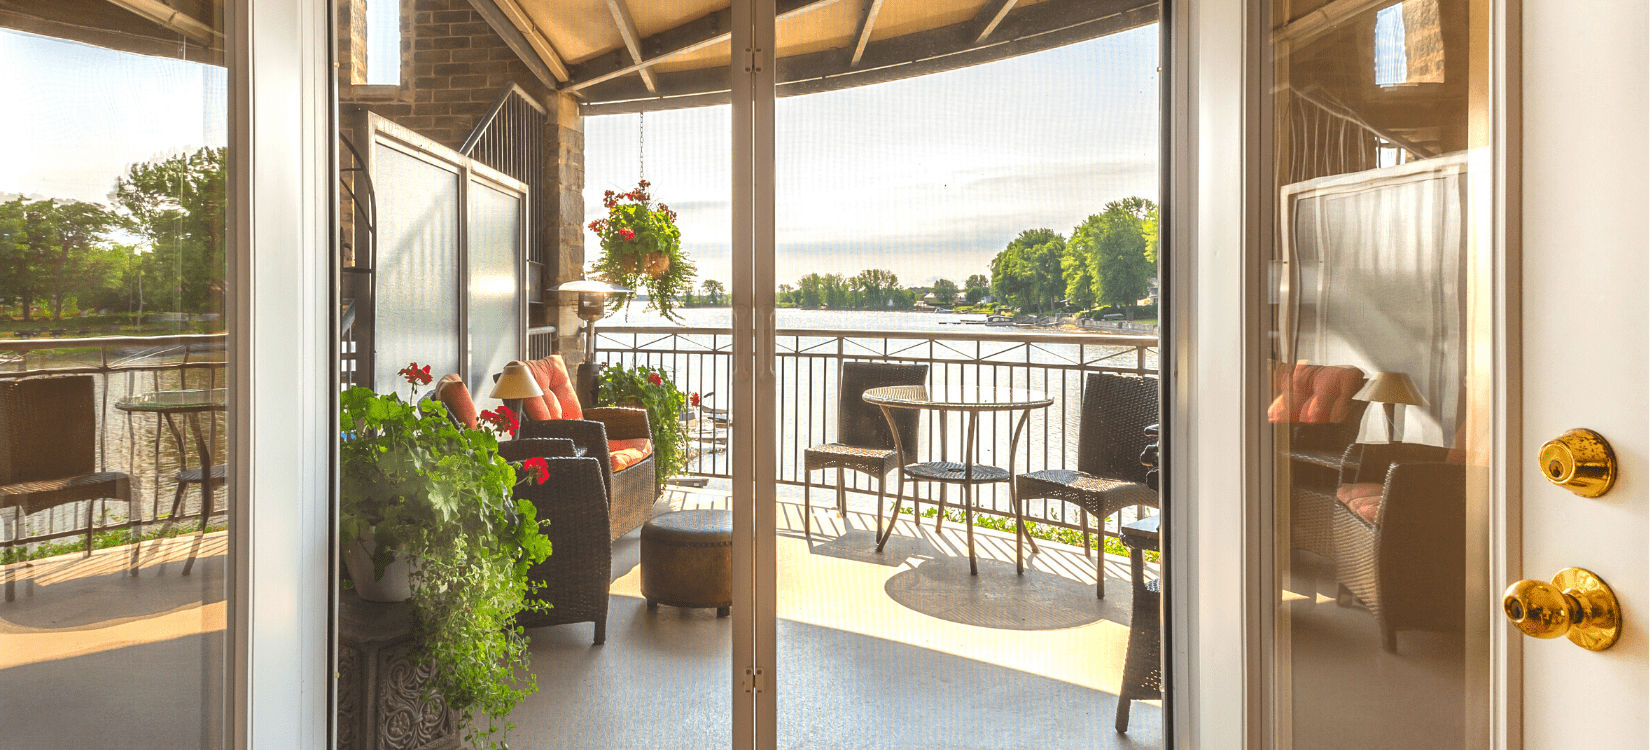 A-view-of-a-lake-and-balcony-through-patio-doors